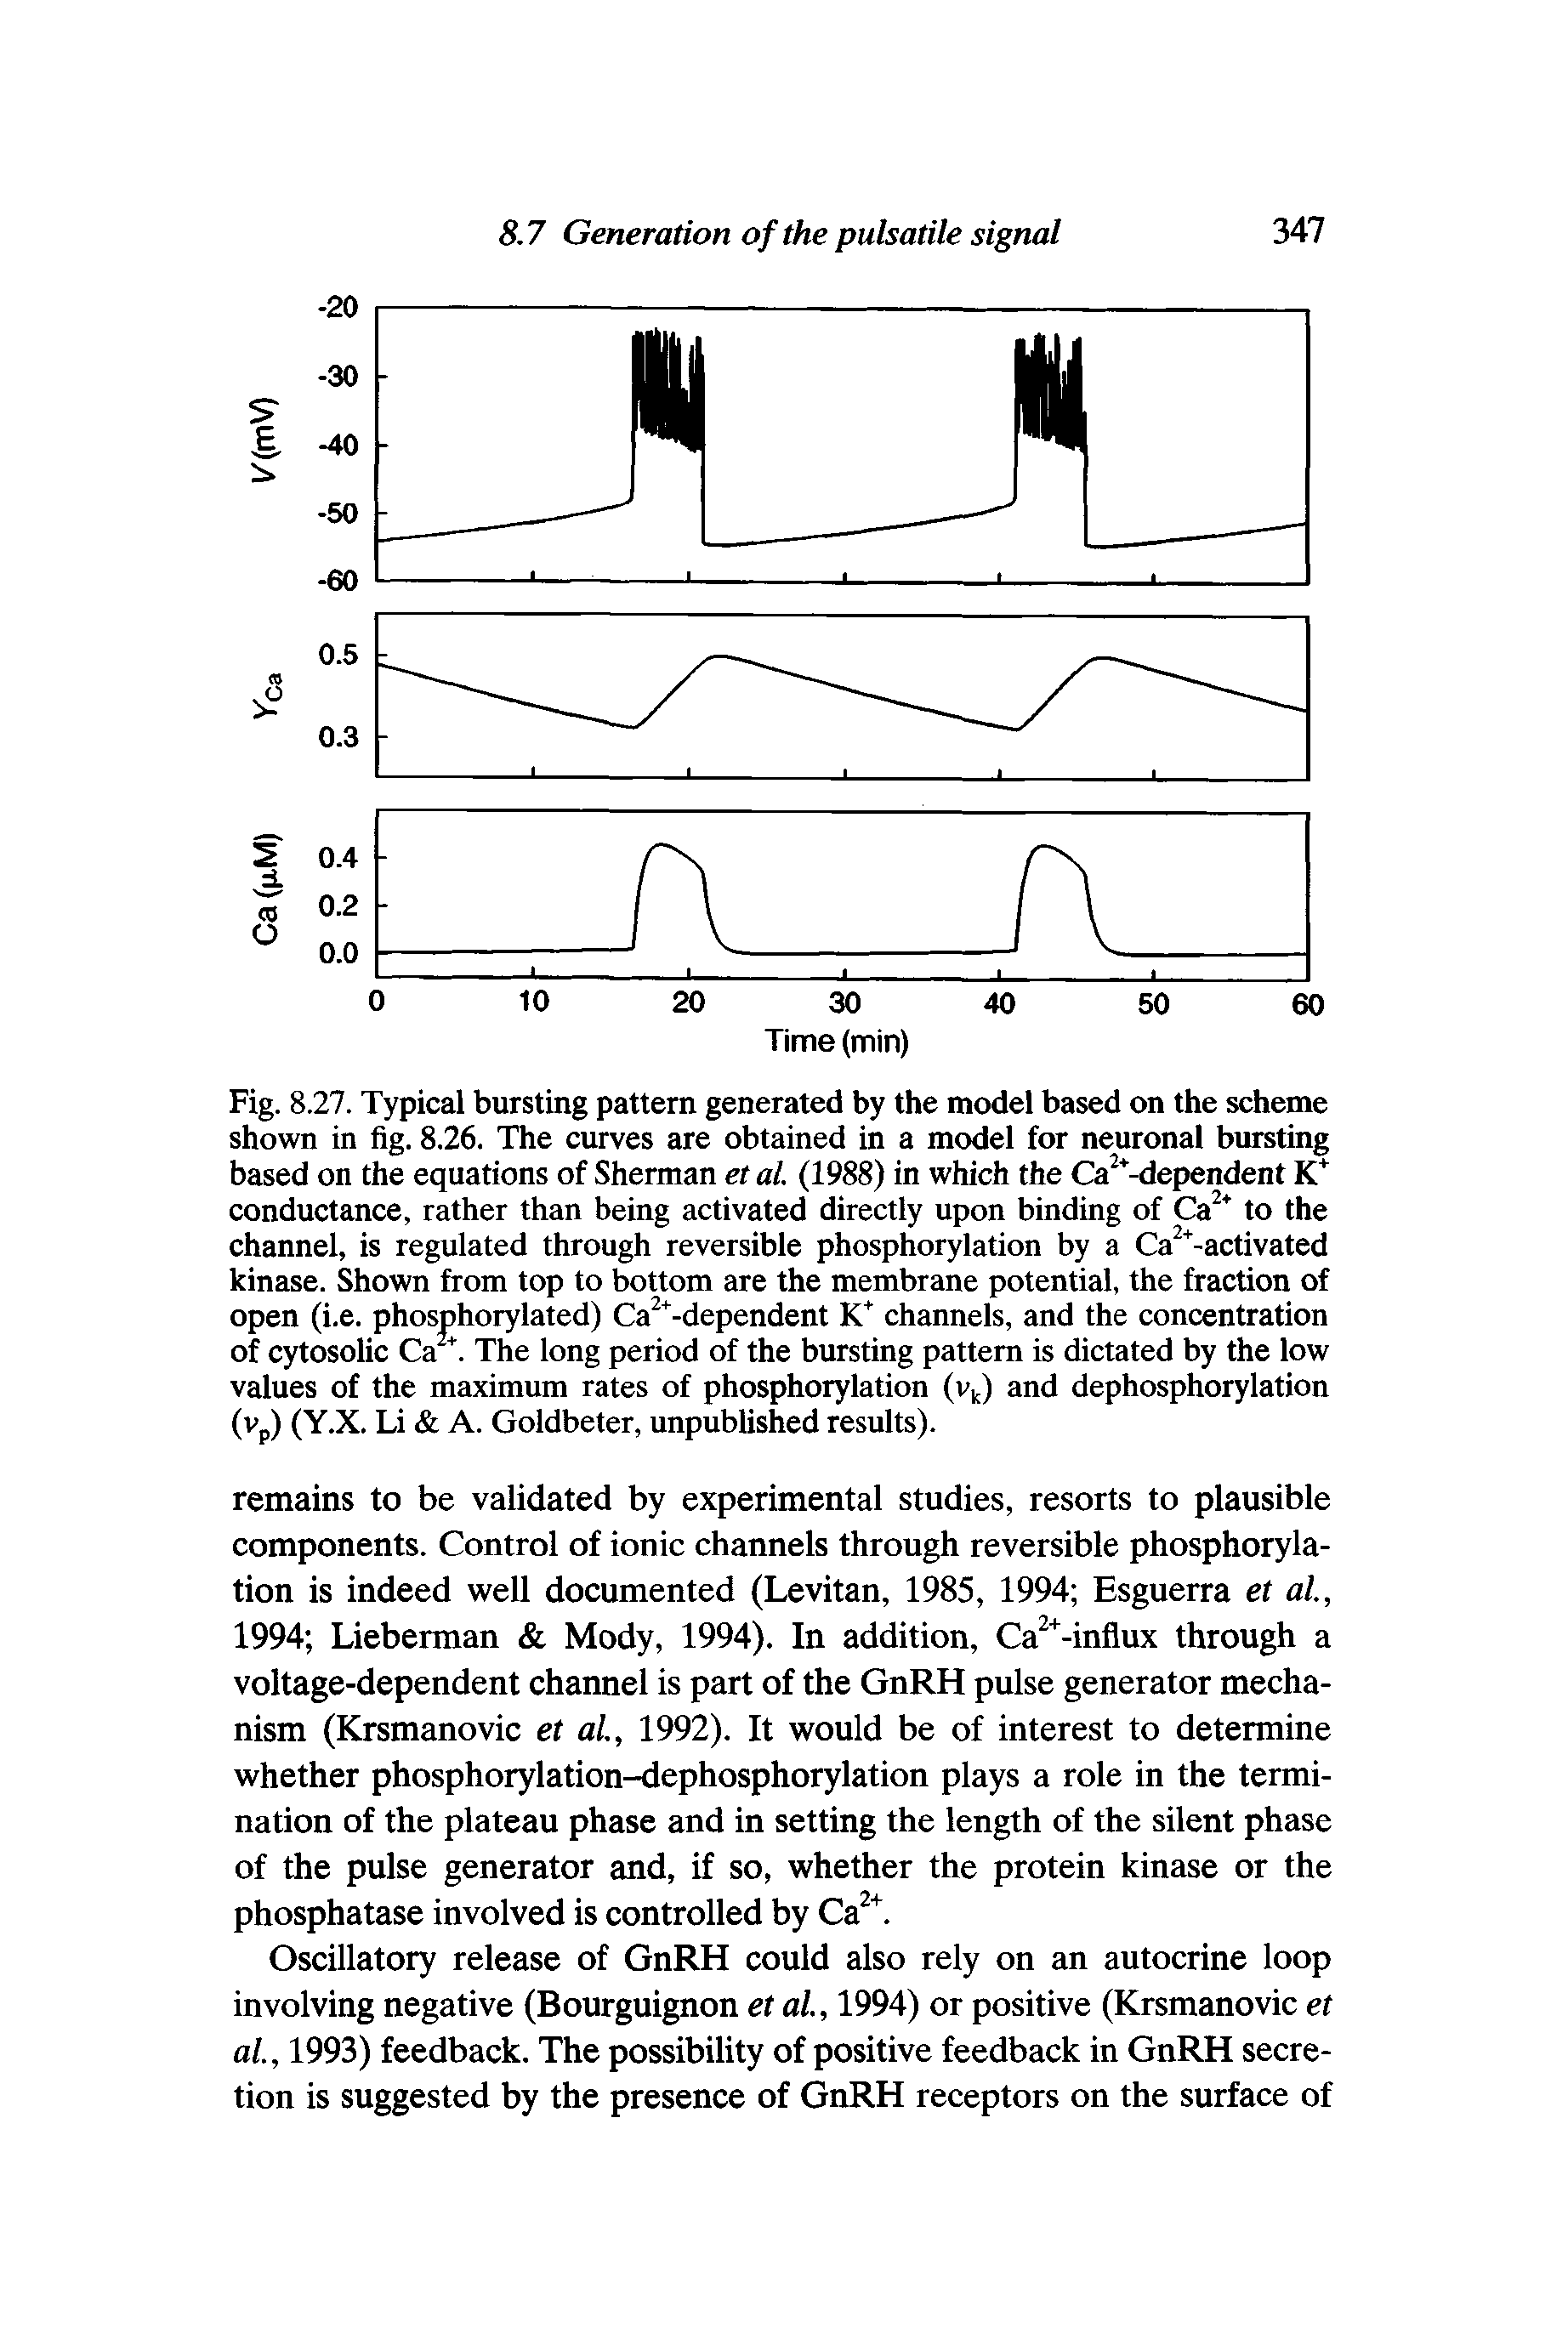 Fig. 8.27. Typical bursting pattern generated by the model based on the scheme shown in fig. 8.26. The curves are obtained in a model for neuronal bursting based on the equations of Sherman et al. (1988) in which the Ca -dependent conductance, rather than being activated directly upon binding of Ca to the channel, is regulated through reversible phosphorylation by a Ca -activated kinase. Shown from top to bottom are the membrane potential, the fraction of open (i.e. phosphorylated) Ca " -dependent channels, and the concentration of cytosolic Ca. The long period of the bursting pattern is dictated by the low values of the maximum rates of phosphorylation (v ) and dephosphorylation (Vp) (Y.X. Li A. Goldbeter, unpublished results).